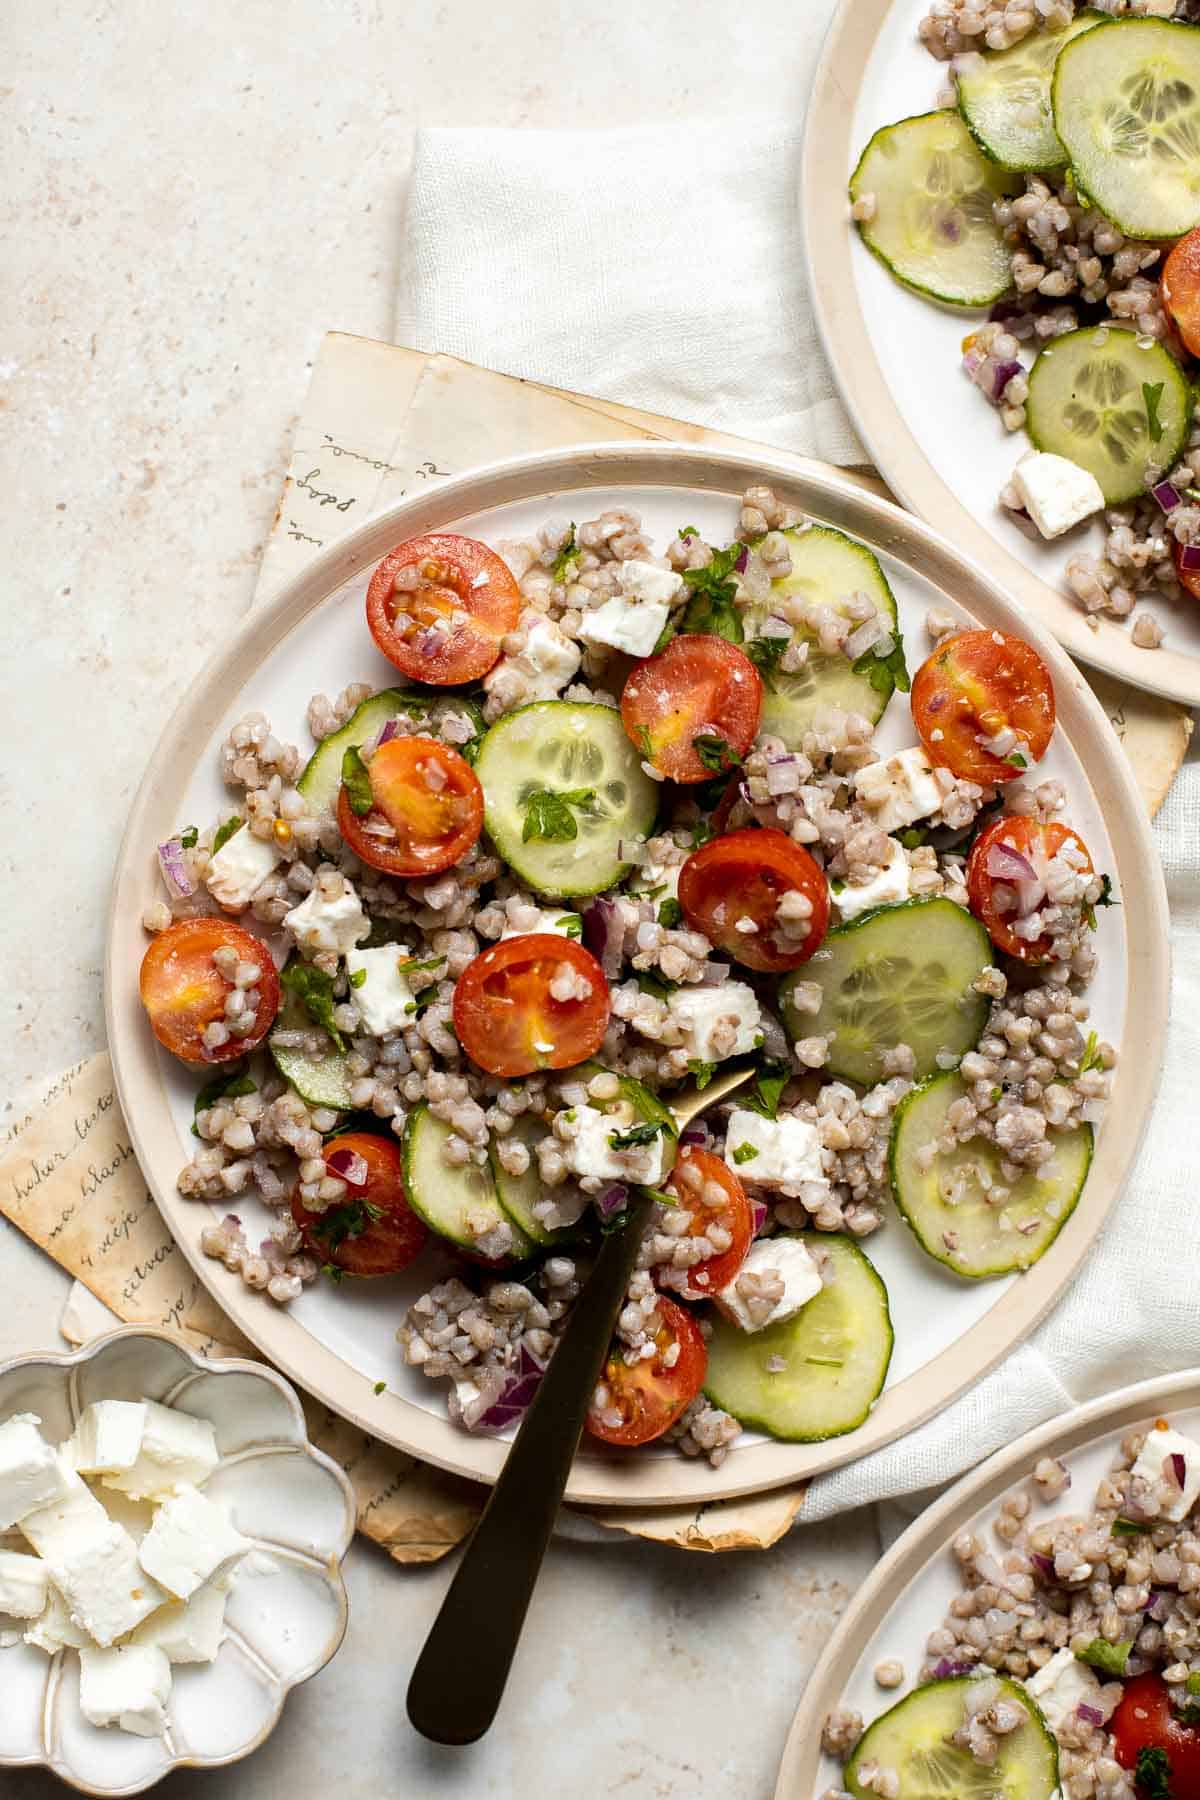 Mediterranean Buckwheat Salad is quick, easy, and delicious. Loaded with superfood buckwheat, this salad is healthy, naturally gluten-free, and vegetarian. | aheadofthyme.com